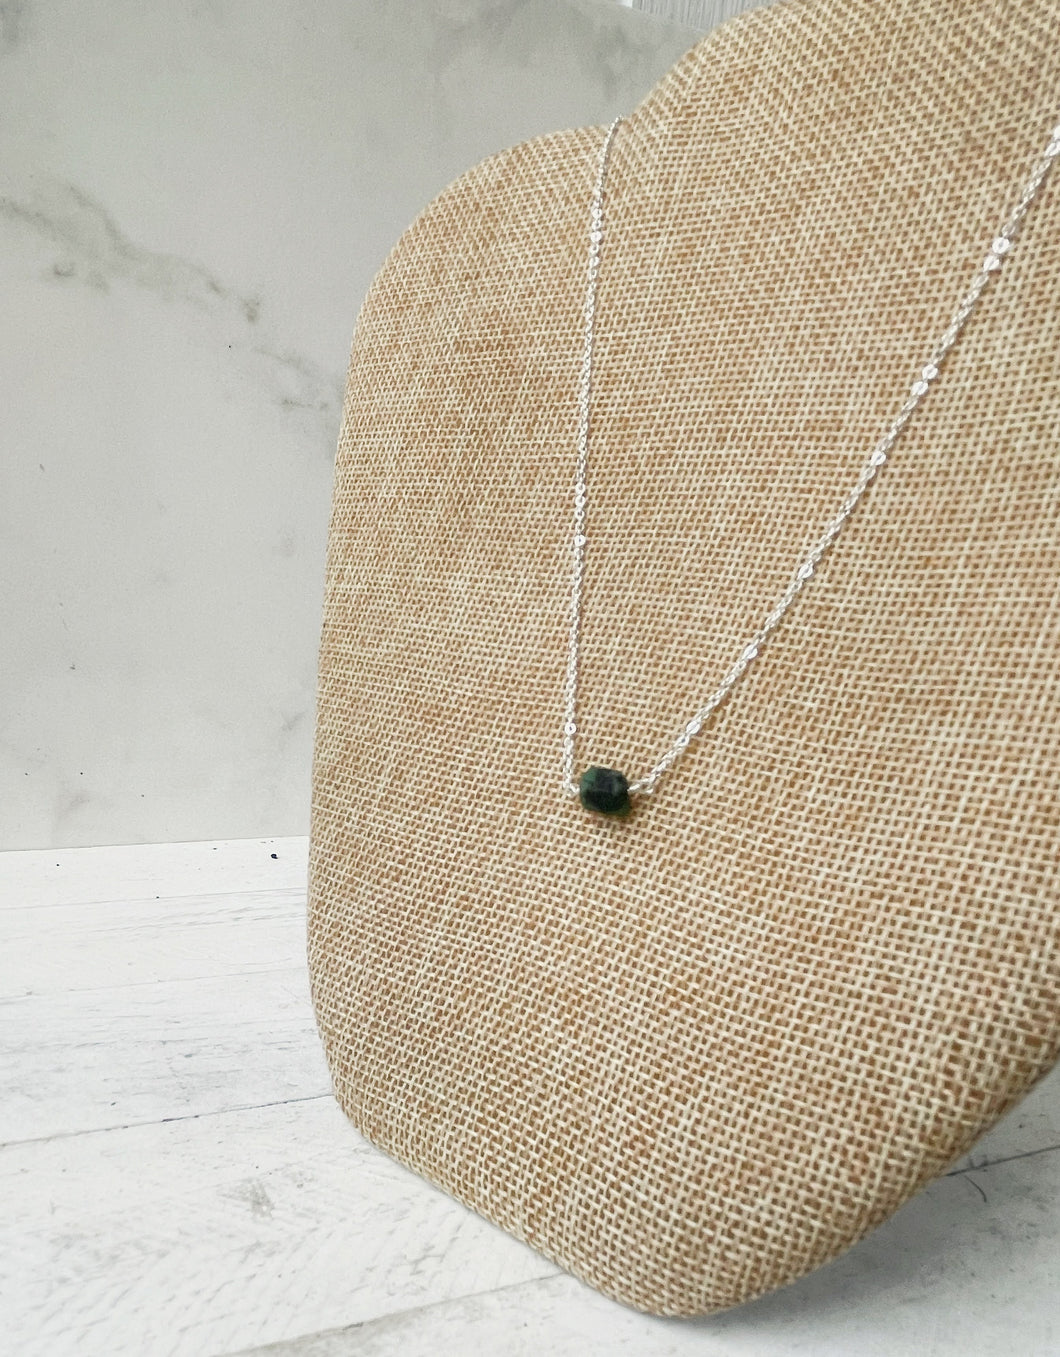 Birthstone Necklace - May - Emerald